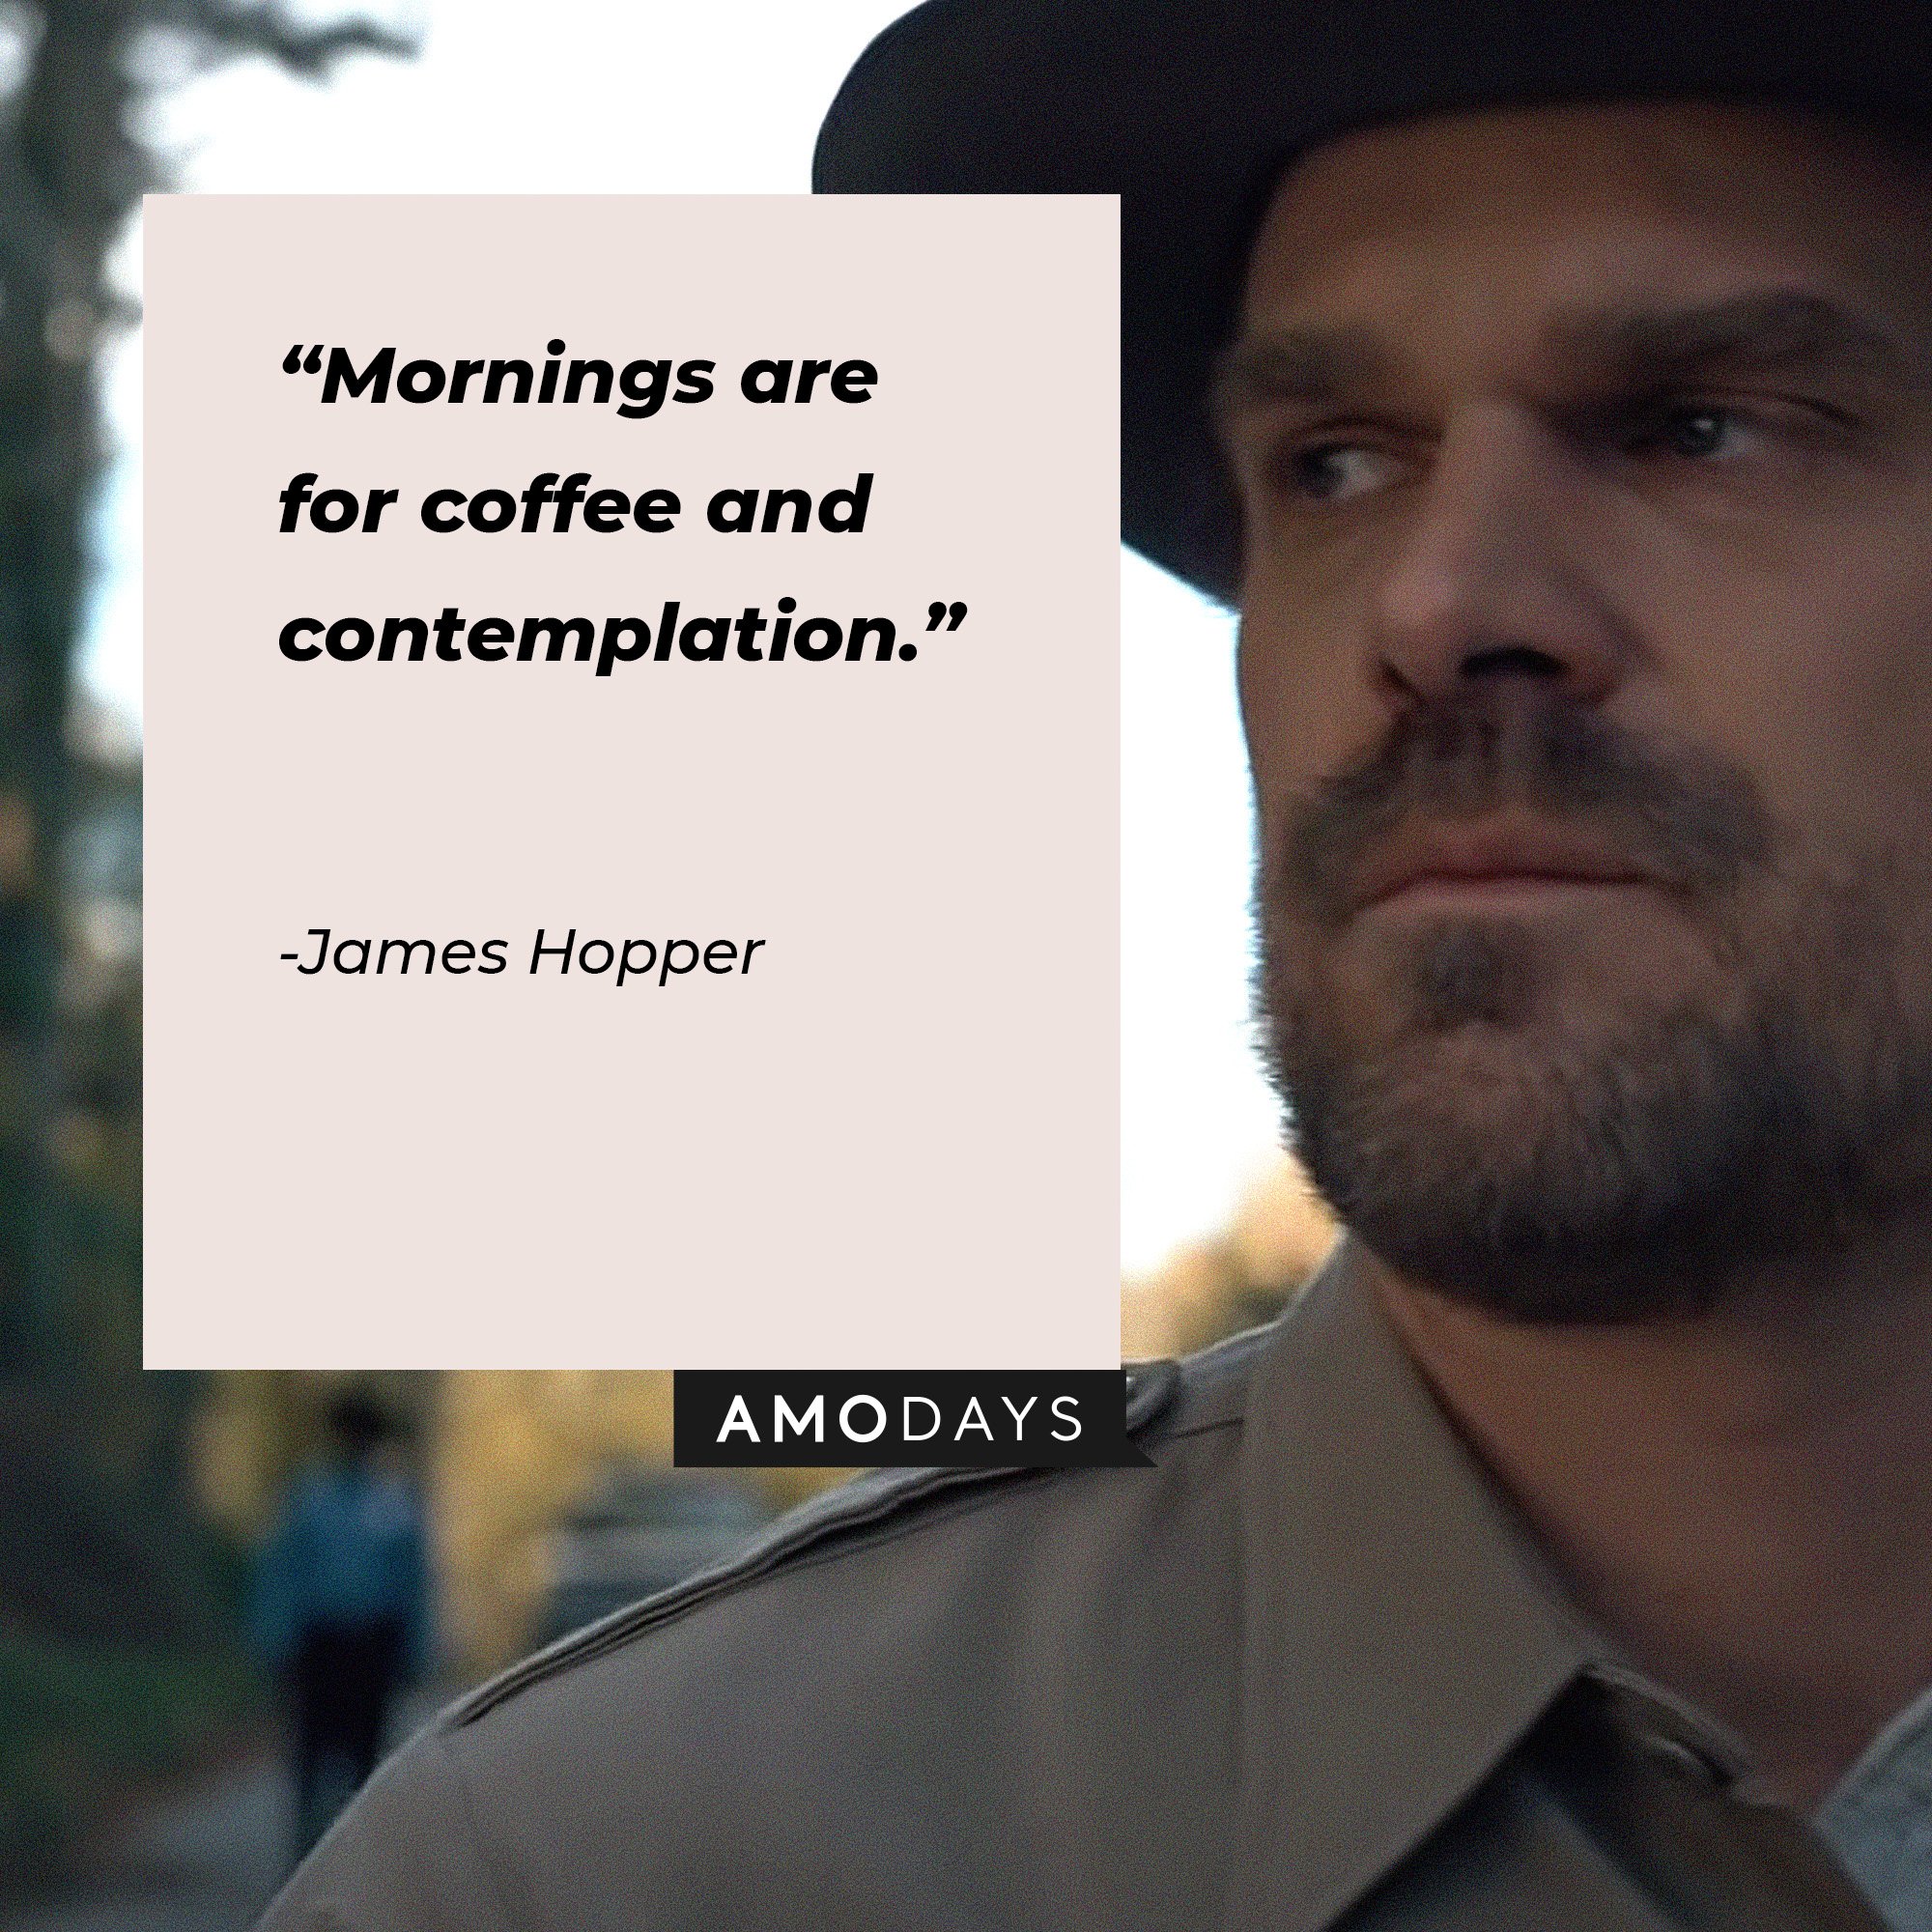 James Hopper’s quote: “Mornings are for coffee and contemplation.” | Image: AmoDays 